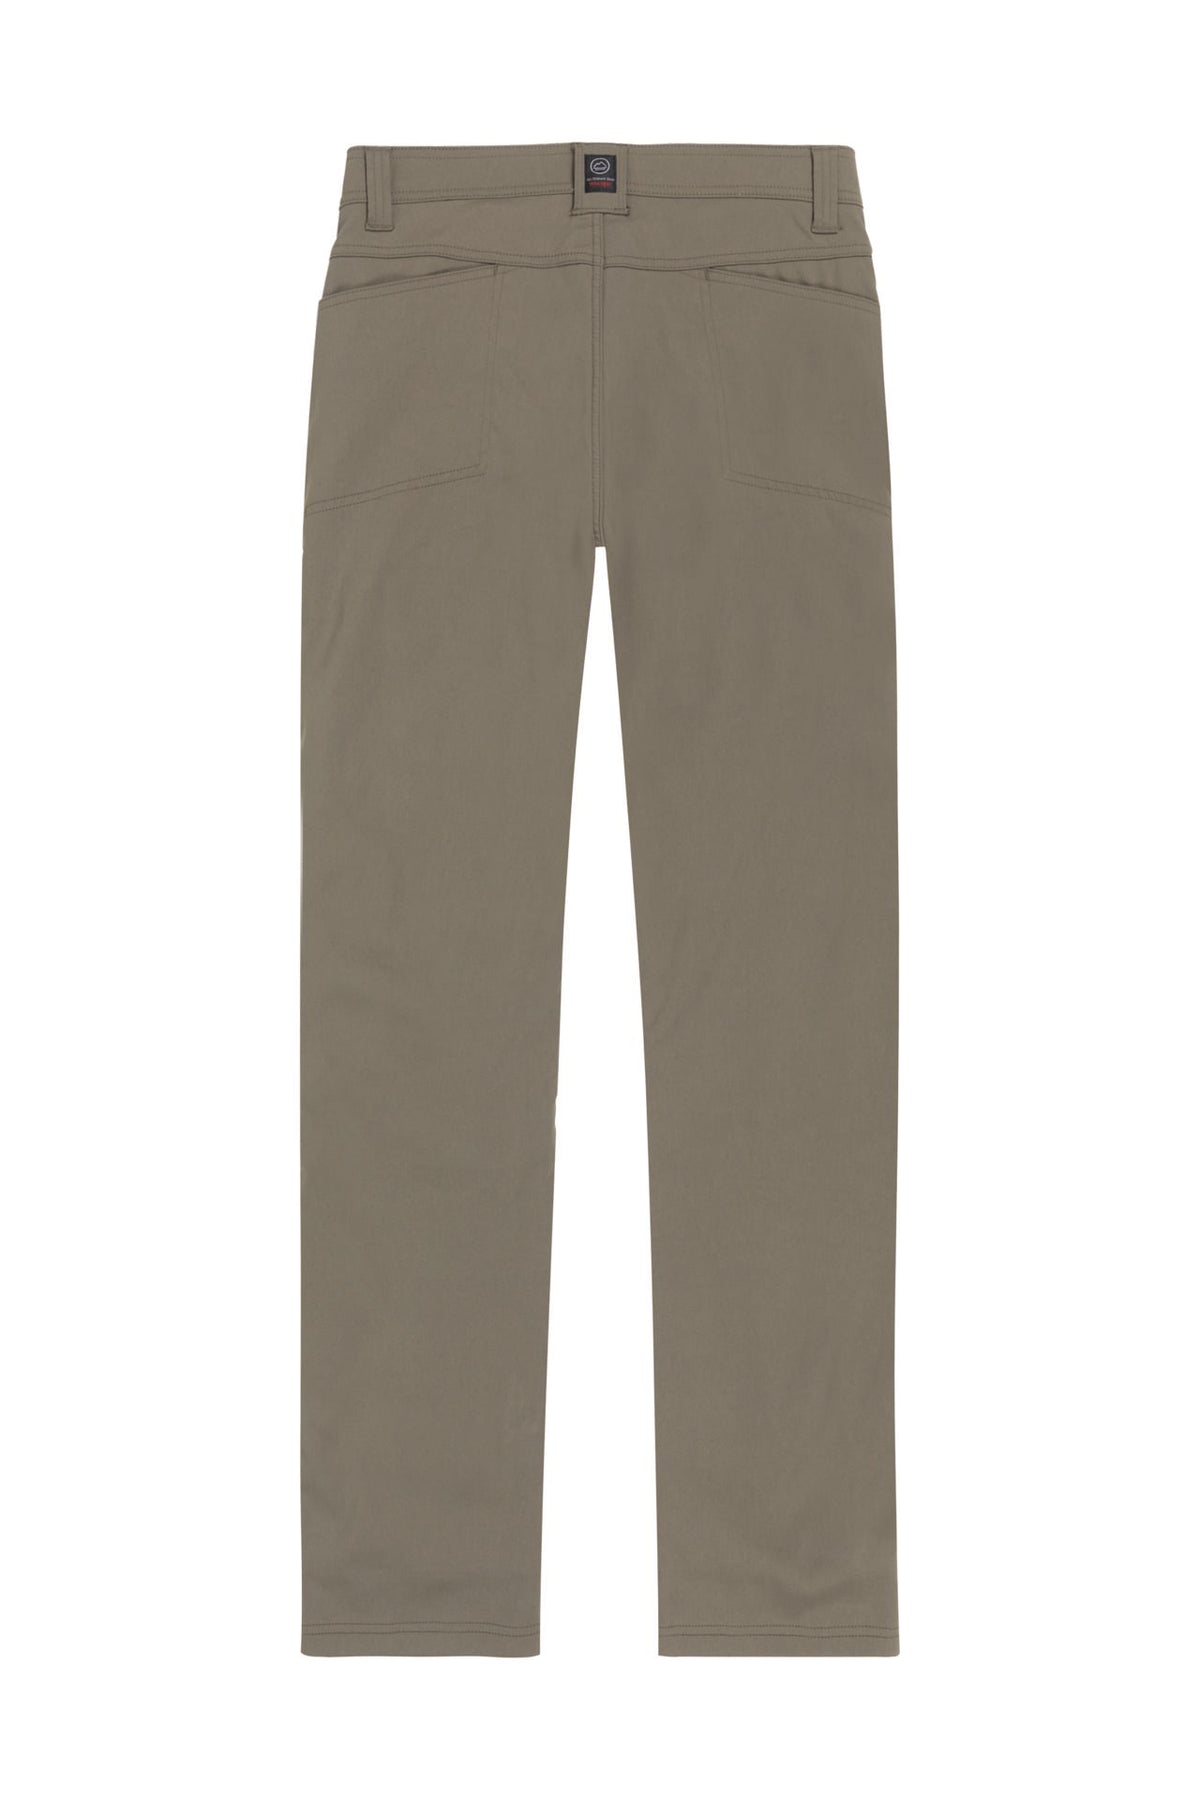 Fleece Lined Utility Pant in Bungee Cord